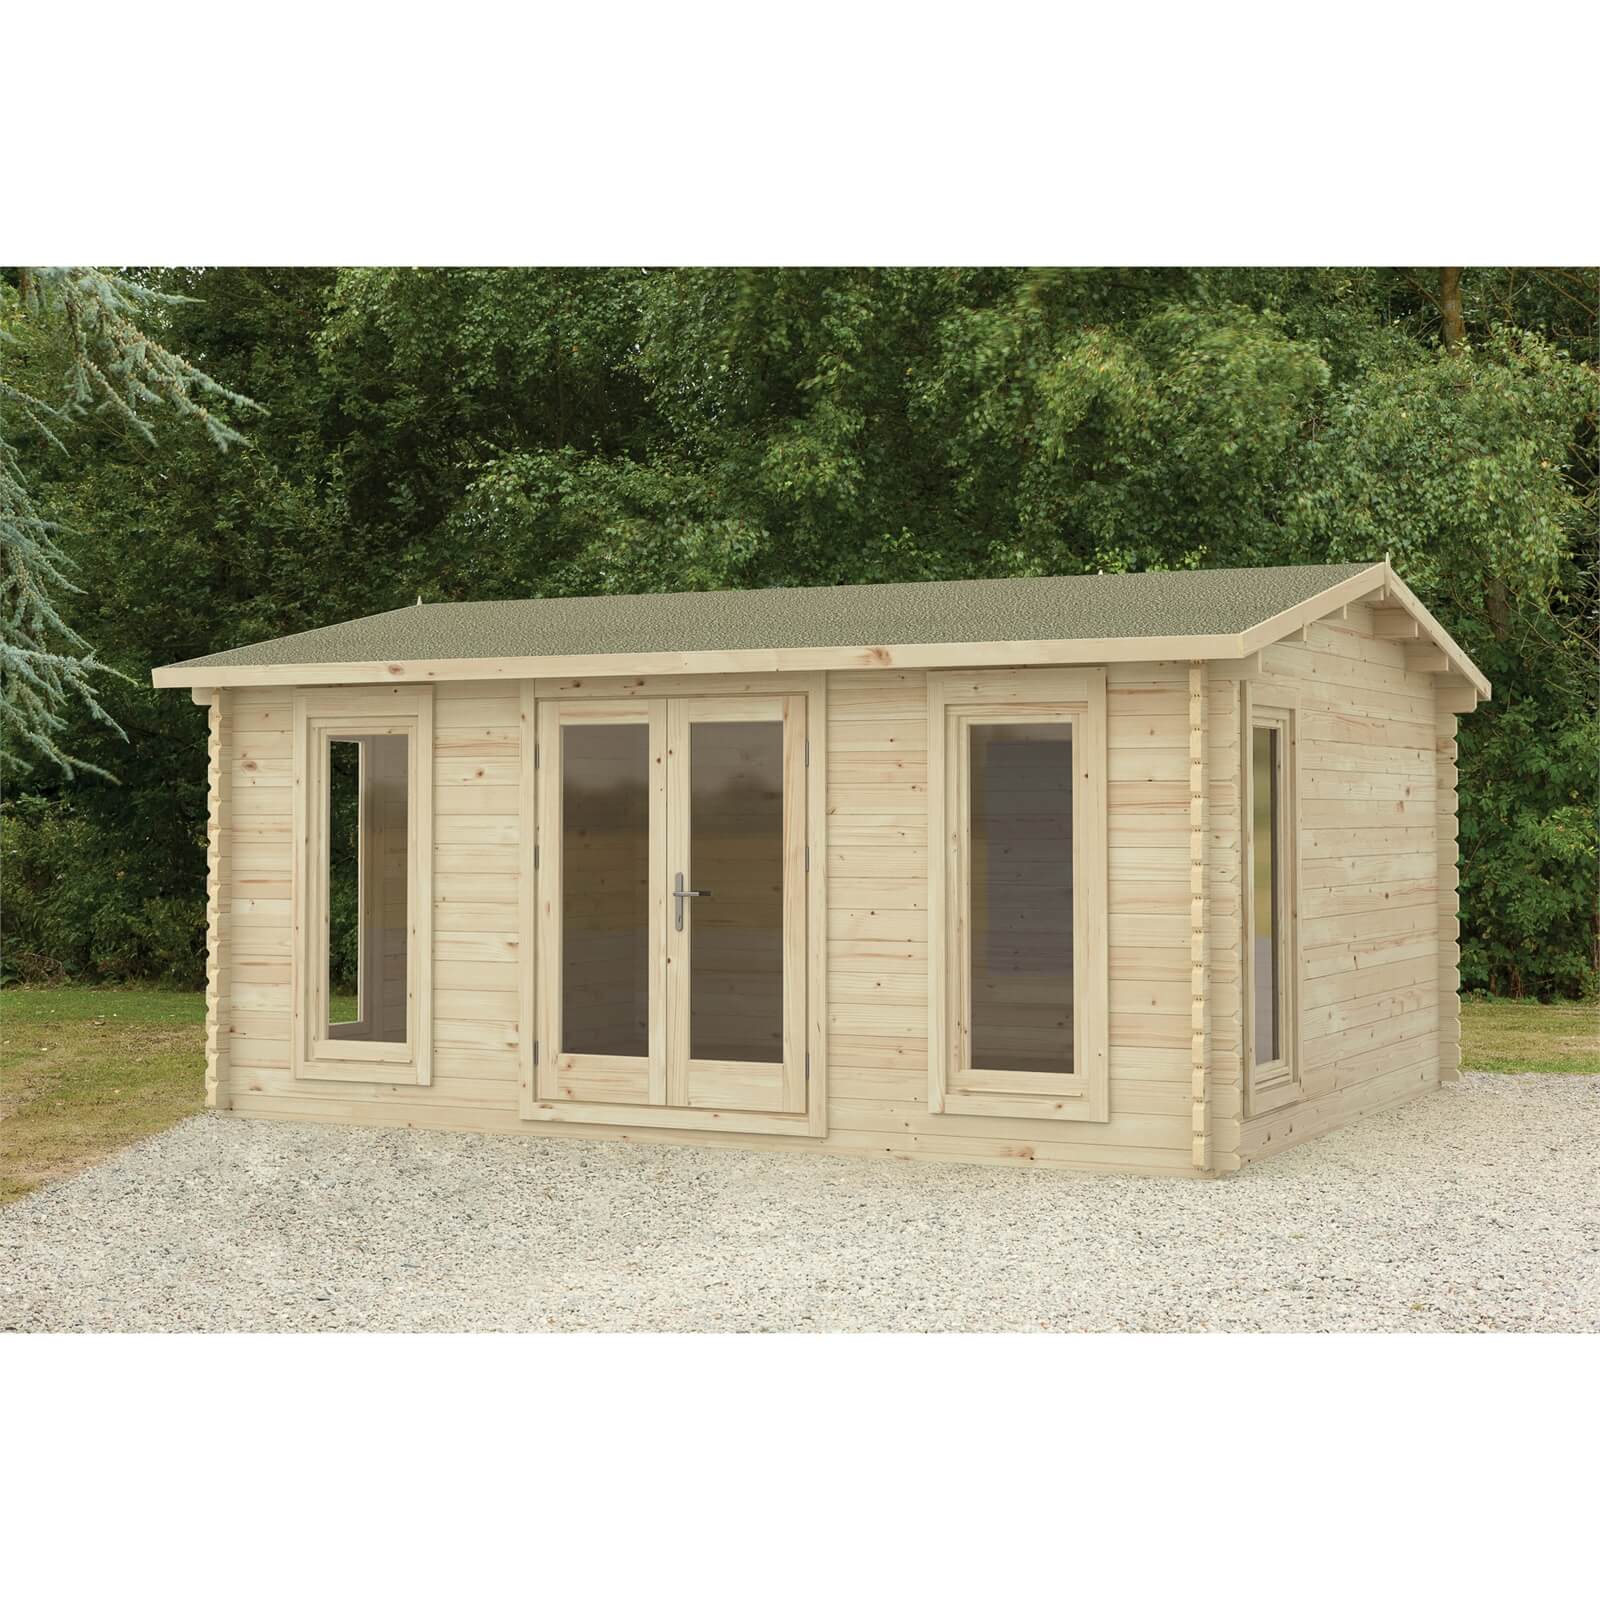 Forest Rushock 5.0m x 4.0m Log Cabin Double Glazed 34kg Polyester Felt, Plus Underlay - Installation Included